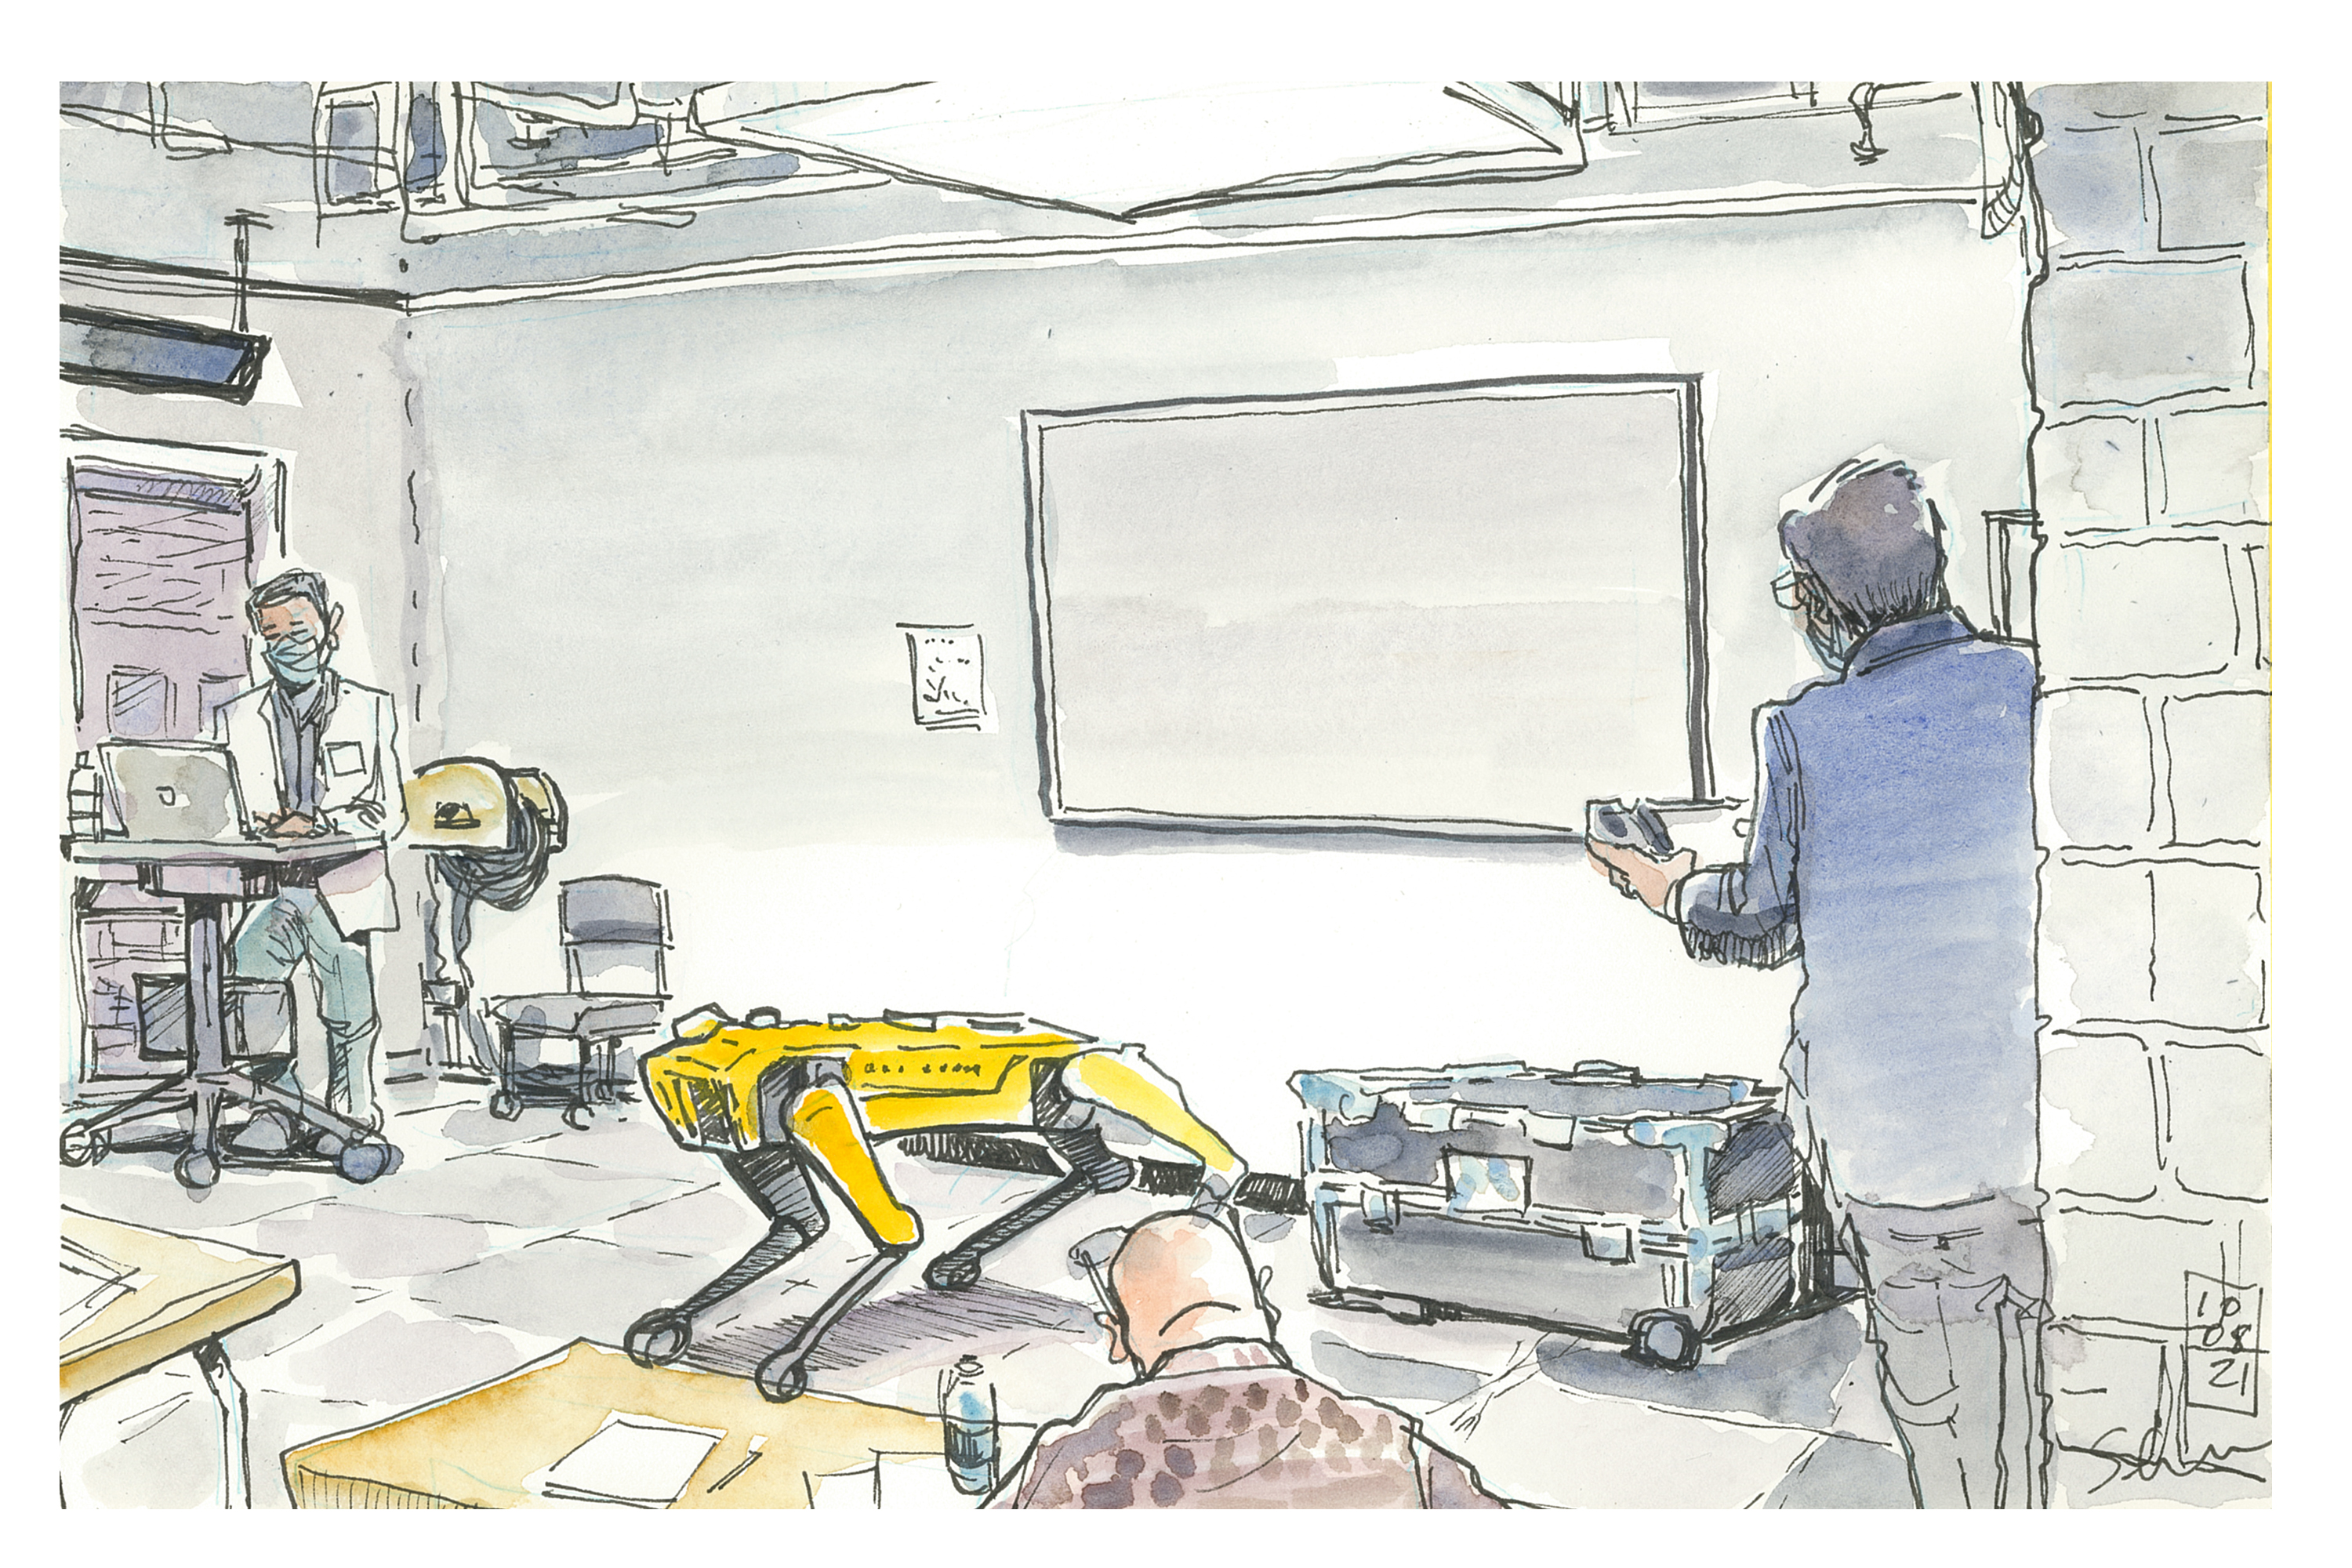 Ink and watercolor sketch of robo device Spot inside room 132 of Bishop-Favrao Hall. Two researchers appear. One uses a remote control interface to control Spot. 